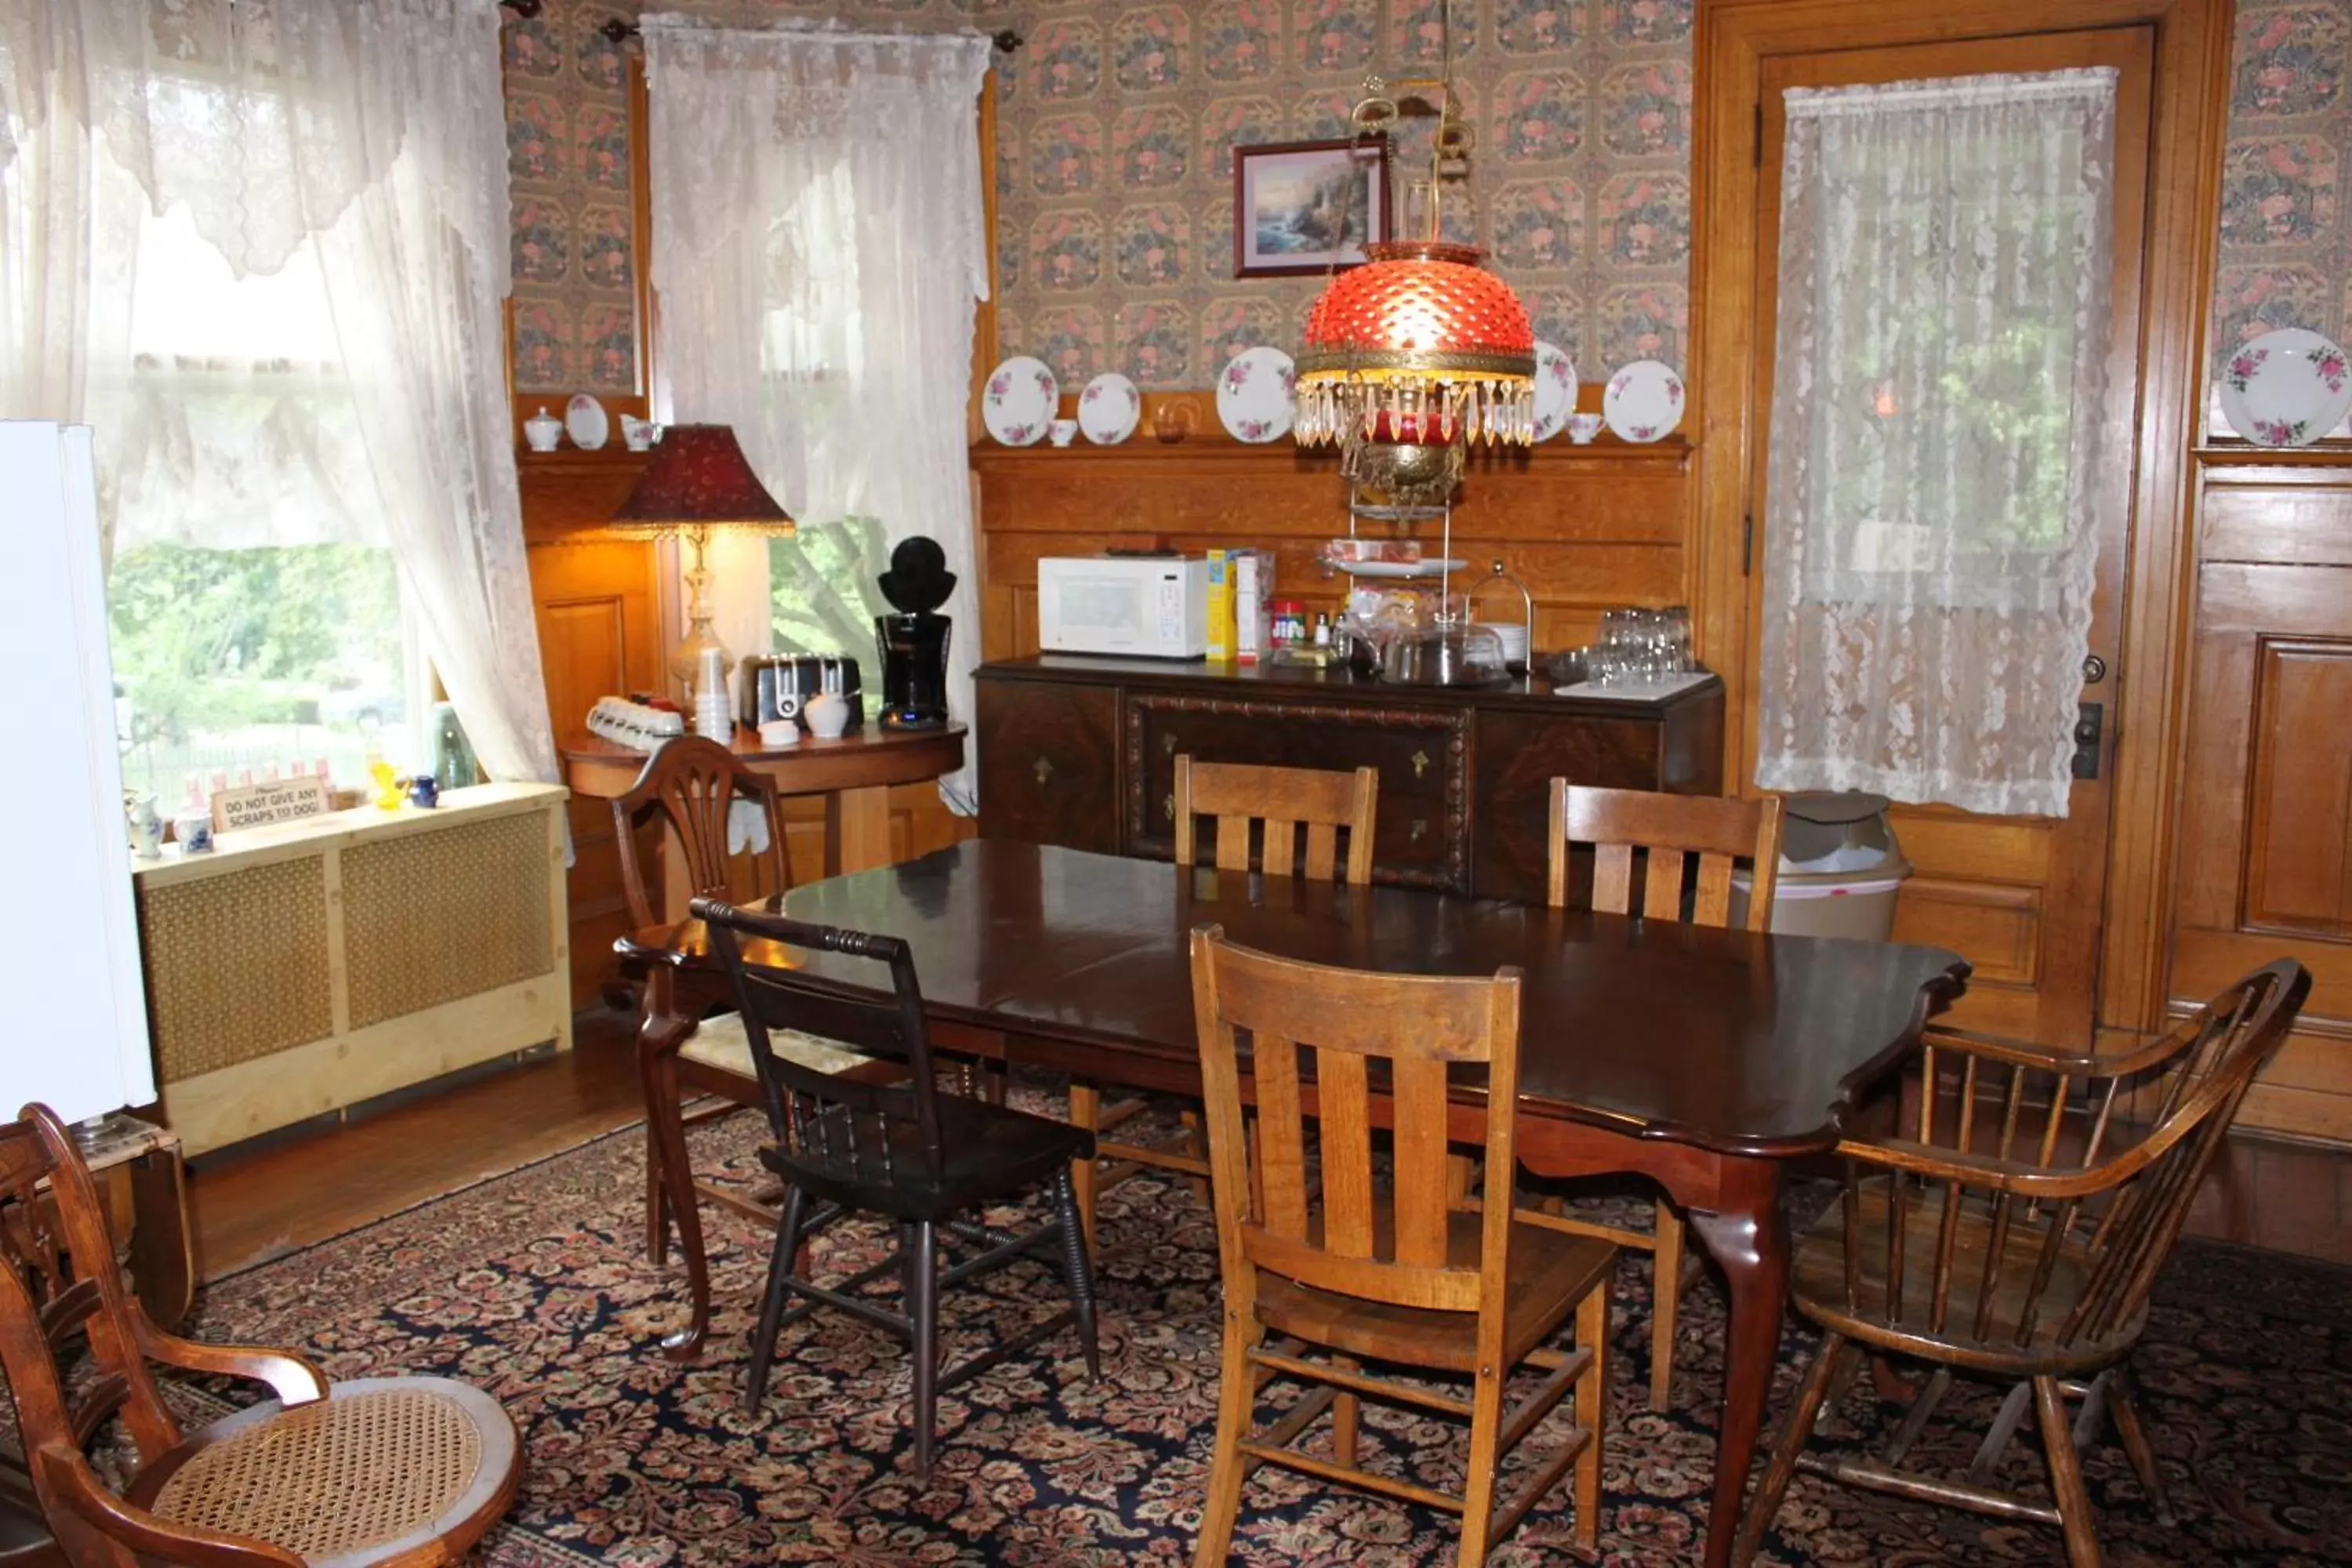 Dining area in Victorian Charm Inn